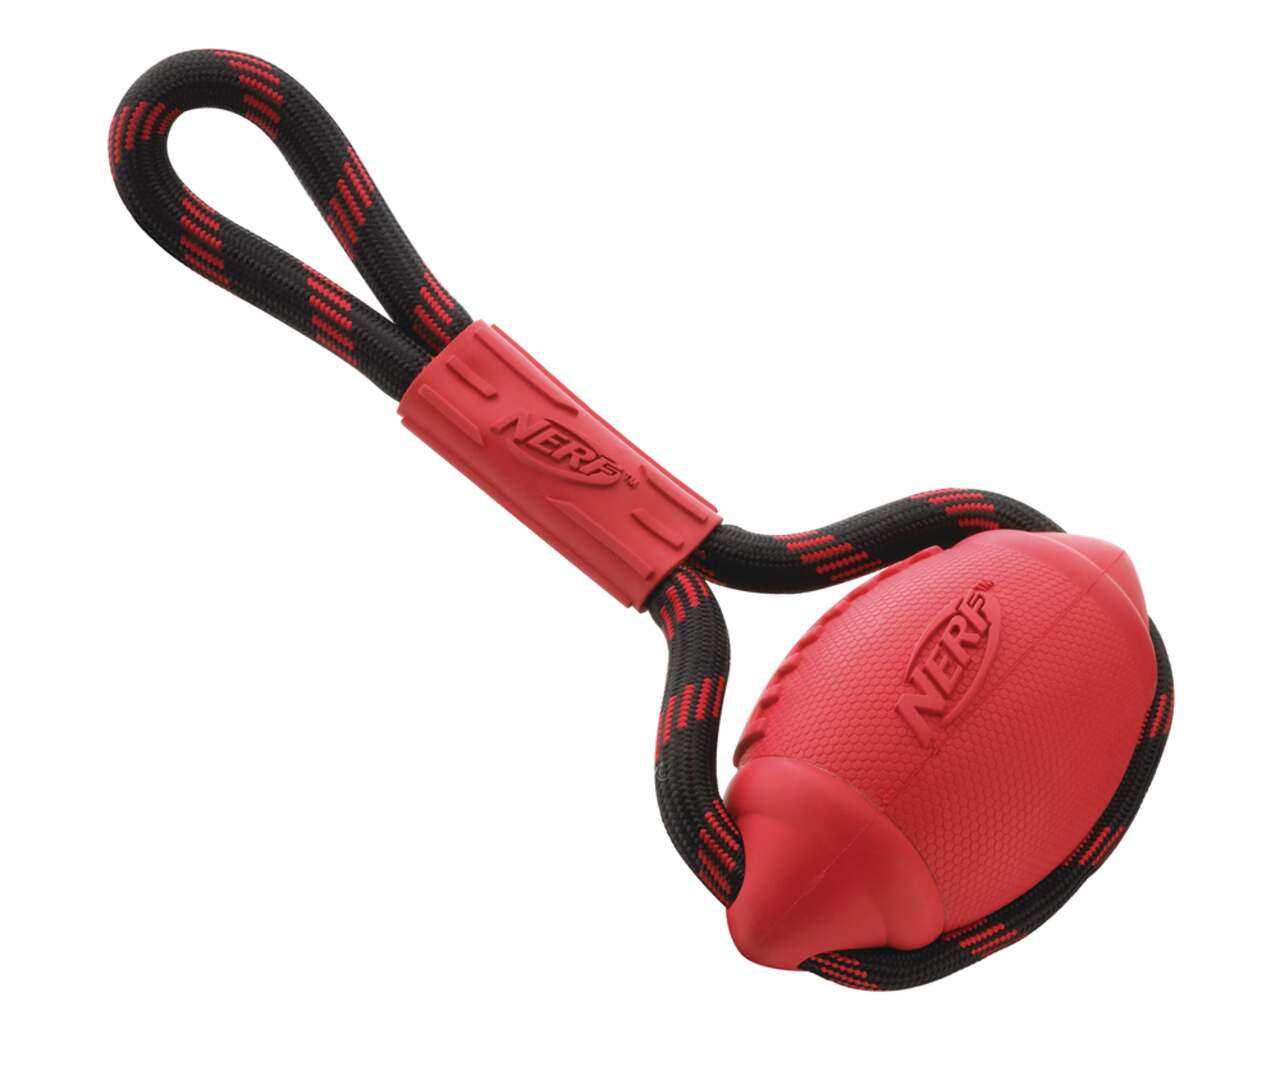 The 6 Best Tug of War Toys for Dogs Who Love the Game